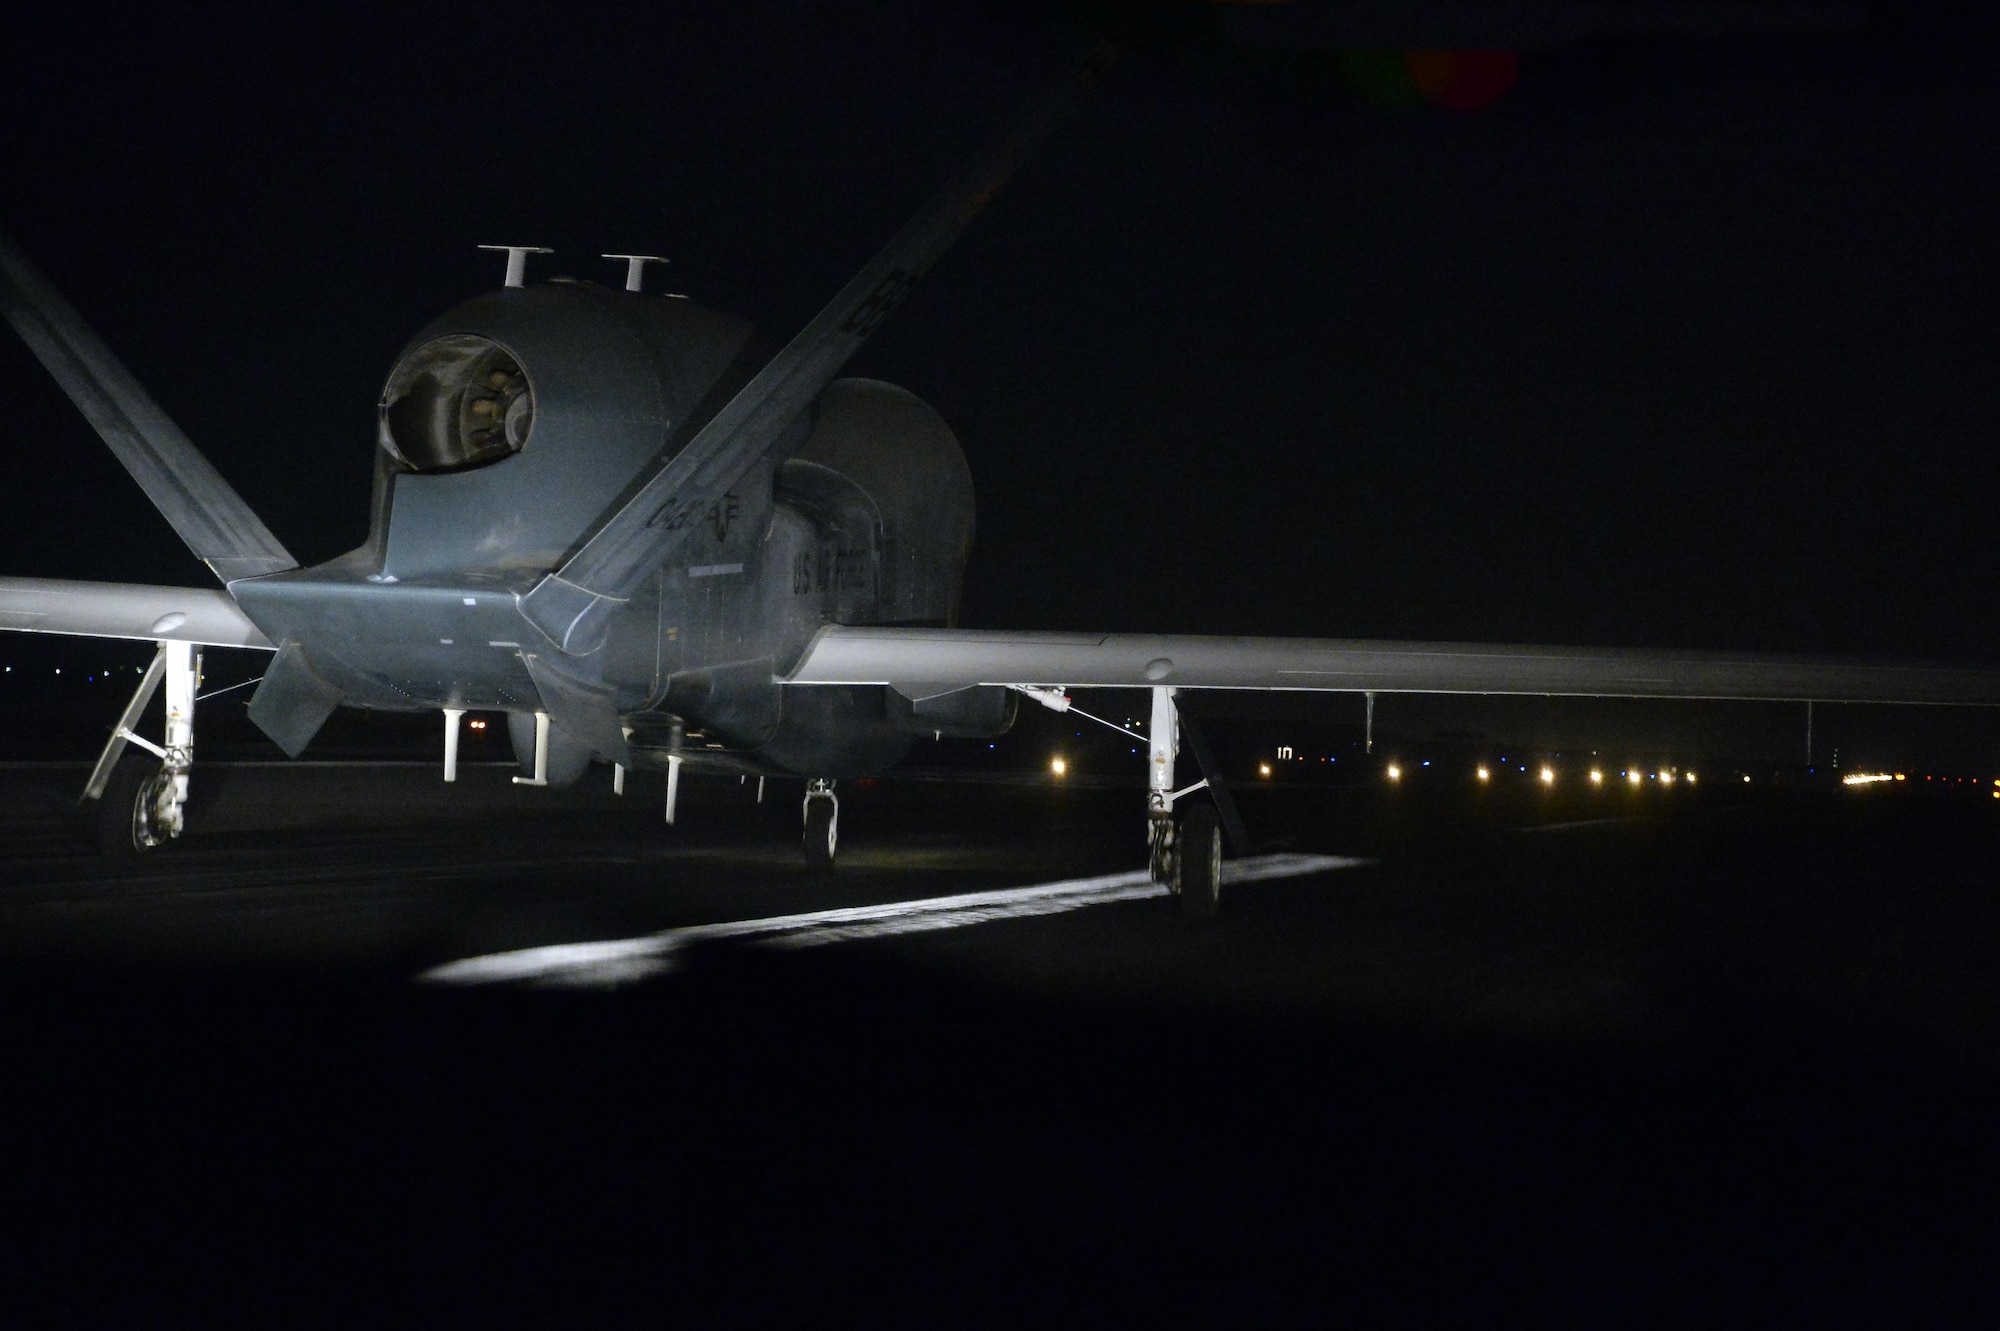 RQ-4 Global Hawk aircraft 2019 taxis prior to takeoff at an undisclosed location in Southwest Asia Mar. 7, 2015. During its service, the aircraft has been providing support to warfighters by relaying communications between people and aircraft as well as enabling airstrikes on the Islamic State of Iraq and the Levant/Da’esh forces. (U.S. Air Force photo/Tech. Sgt. Marie Brown)